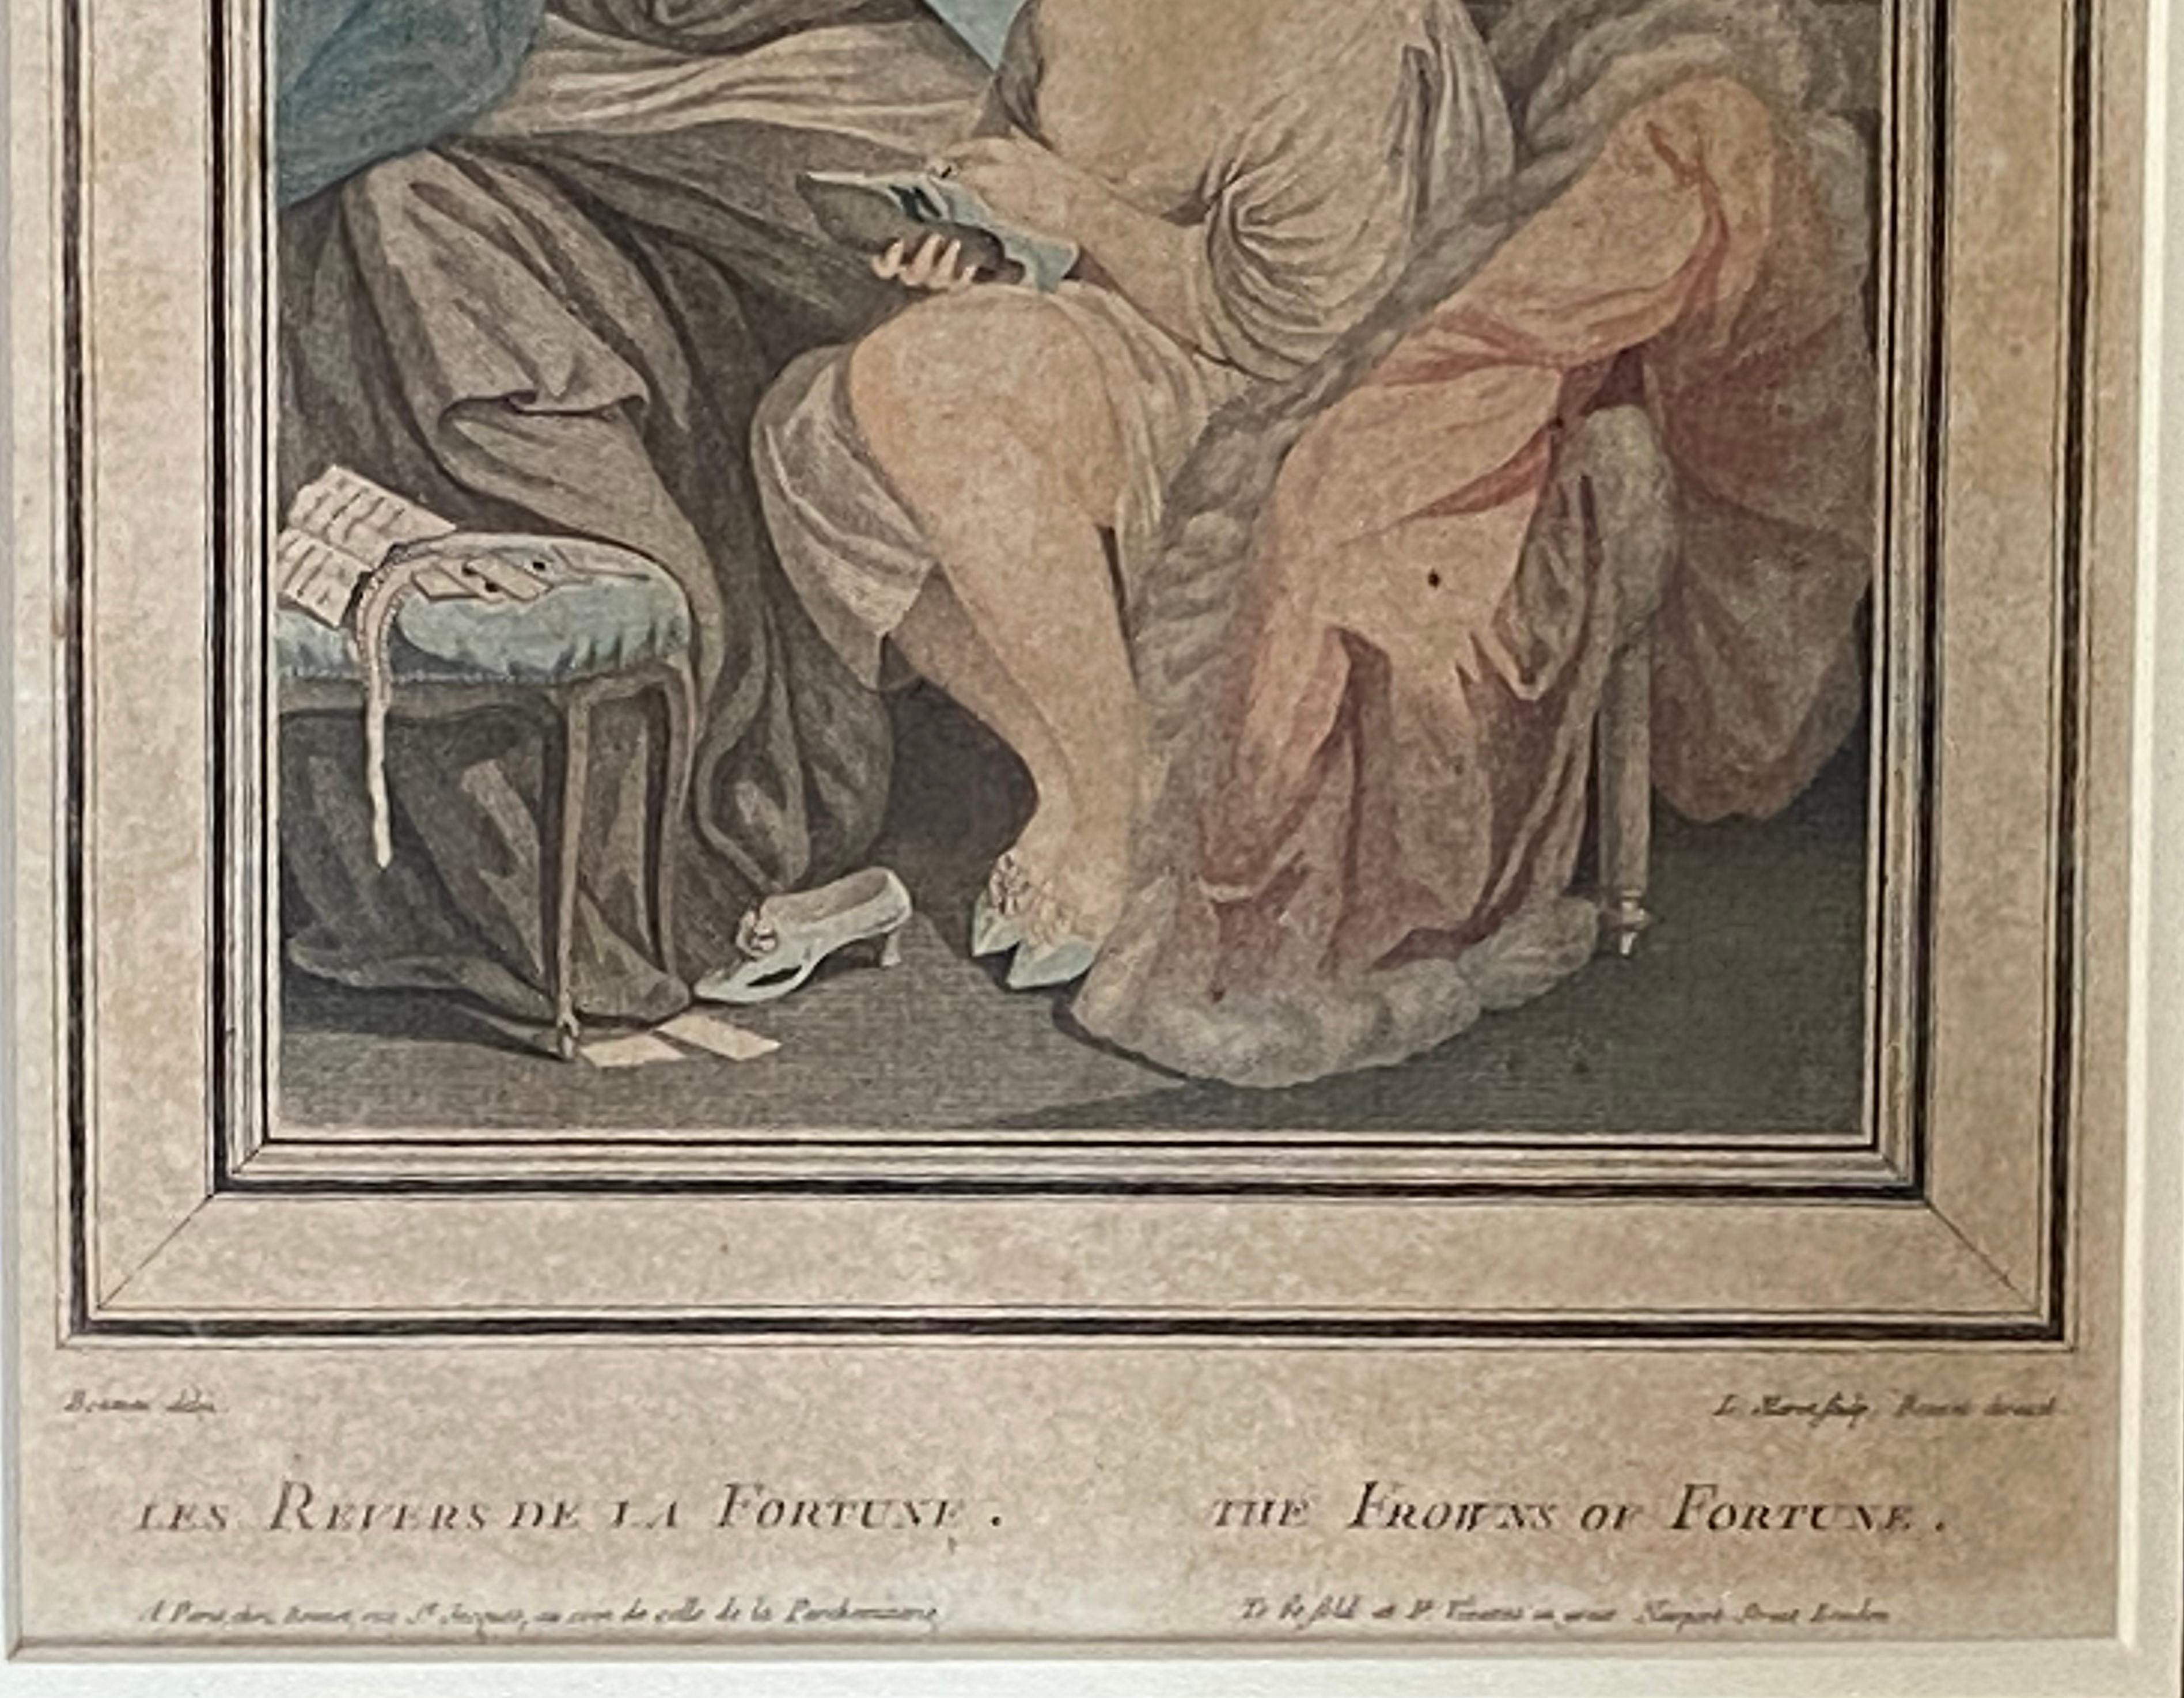 Original stipple engraving with colors titled “Les Revers de la Fortune” (Reversal of Fortune) by the well known French engraver, Louis Marin Bonnet.  Circa 1885. Condition is good to very good. The artwork is under UV plexiglass.  Recently